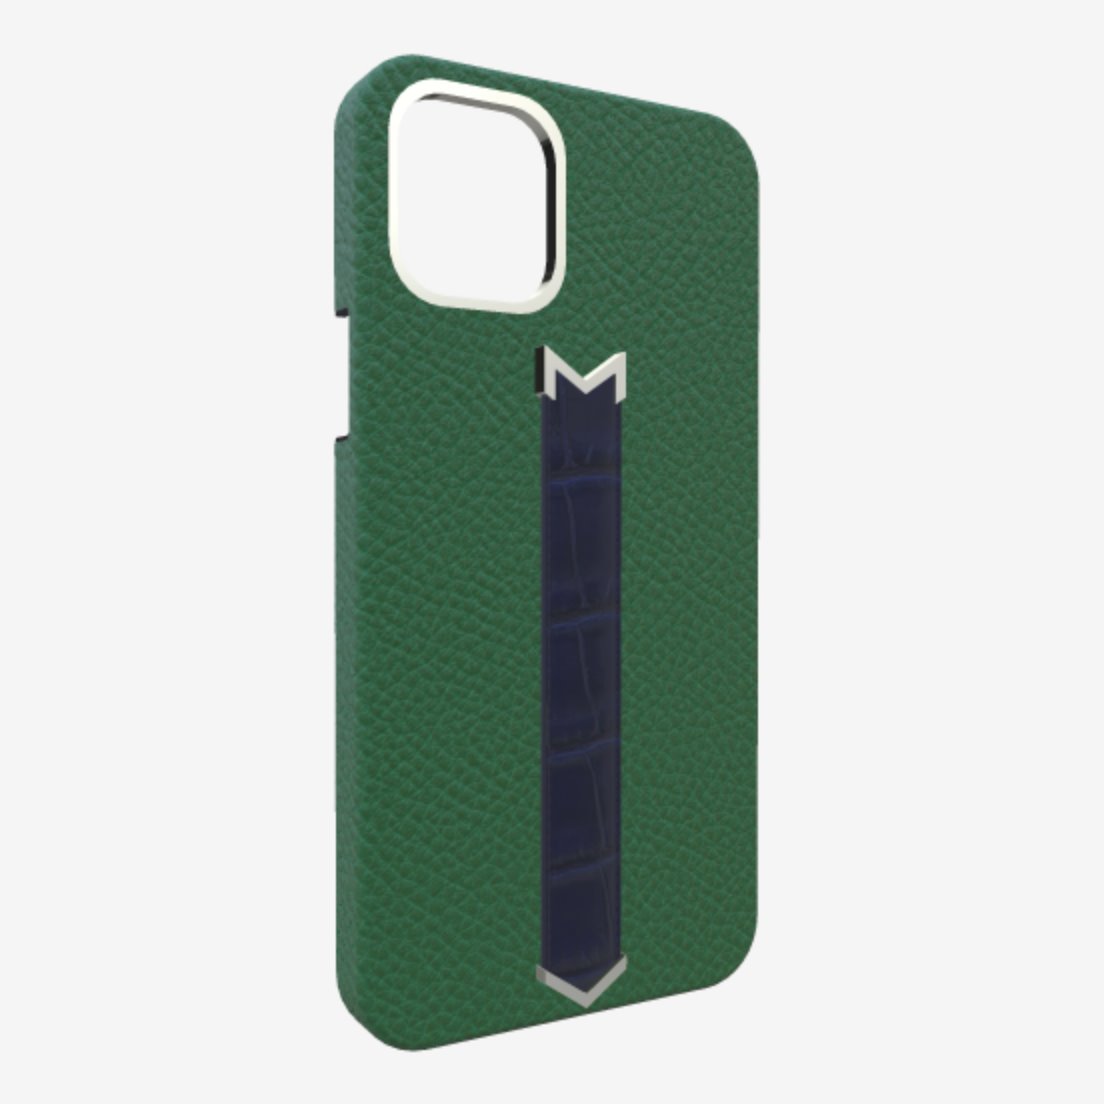 Silver Finger Strap Case for iPhone 13 Pro Max in Genuine Calfskin and Alligator Emerald-Green Navy-Blue 